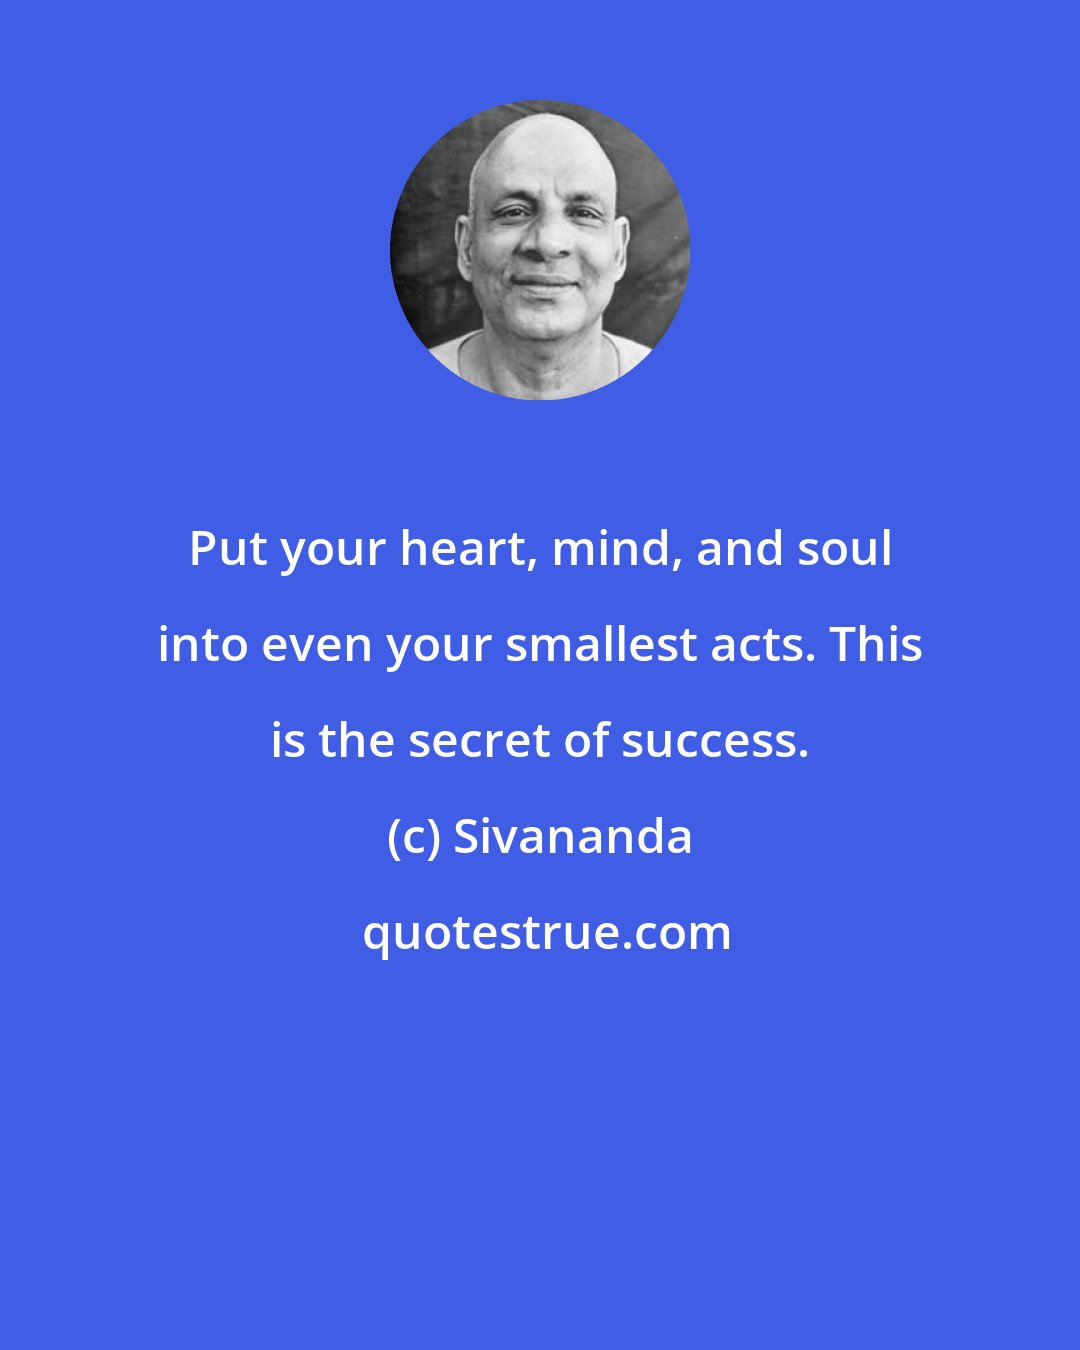 Sivananda: Put your heart, mind, and soul into even your smallest acts. This is the secret of success.